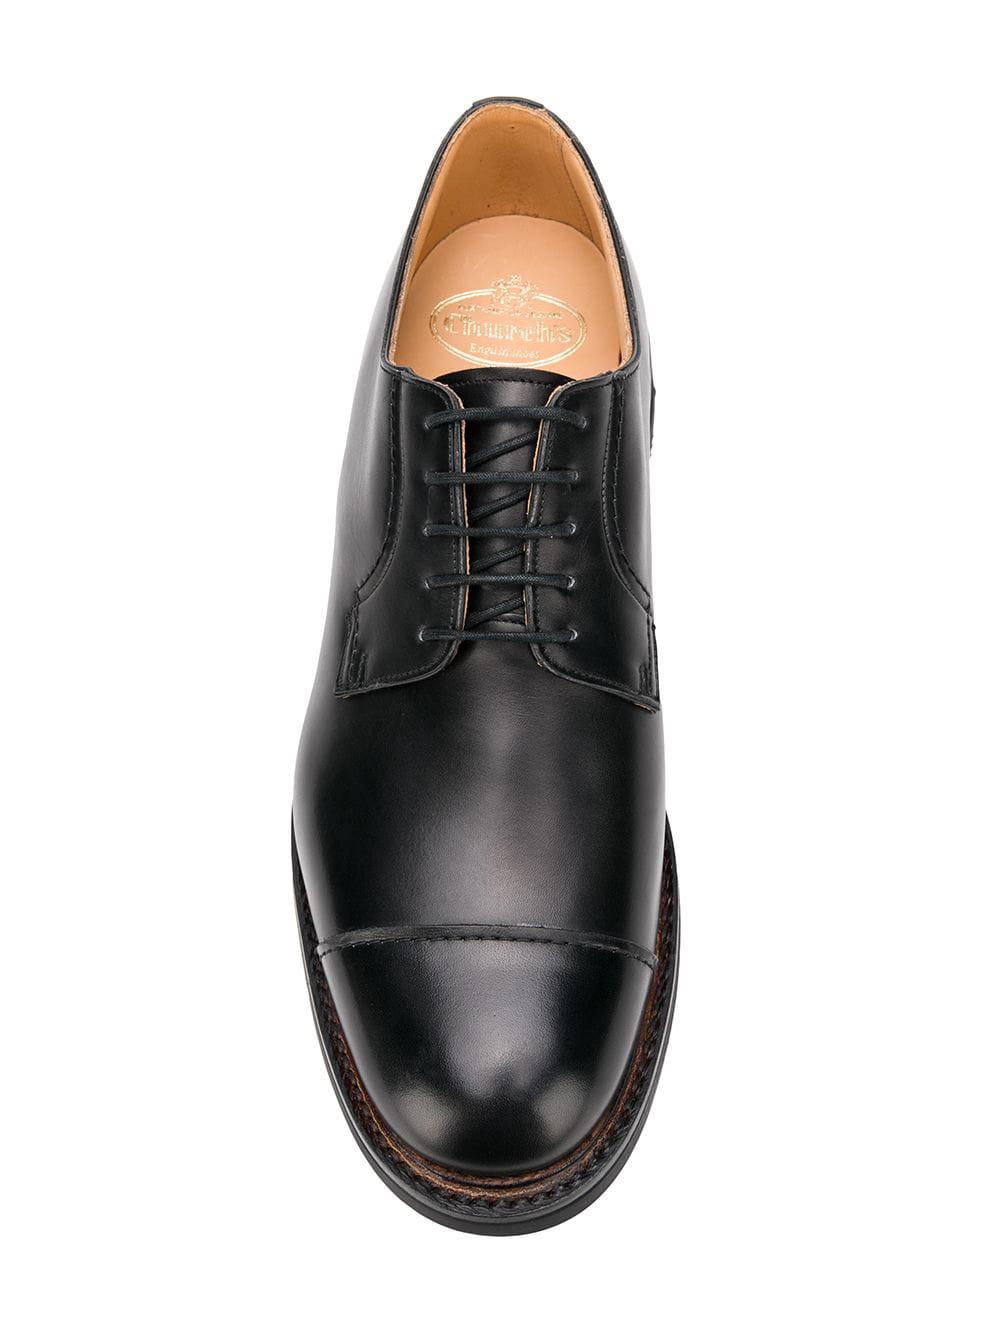 Church's Leather Wellington Lace-up Shoes in Black for Men - Lyst